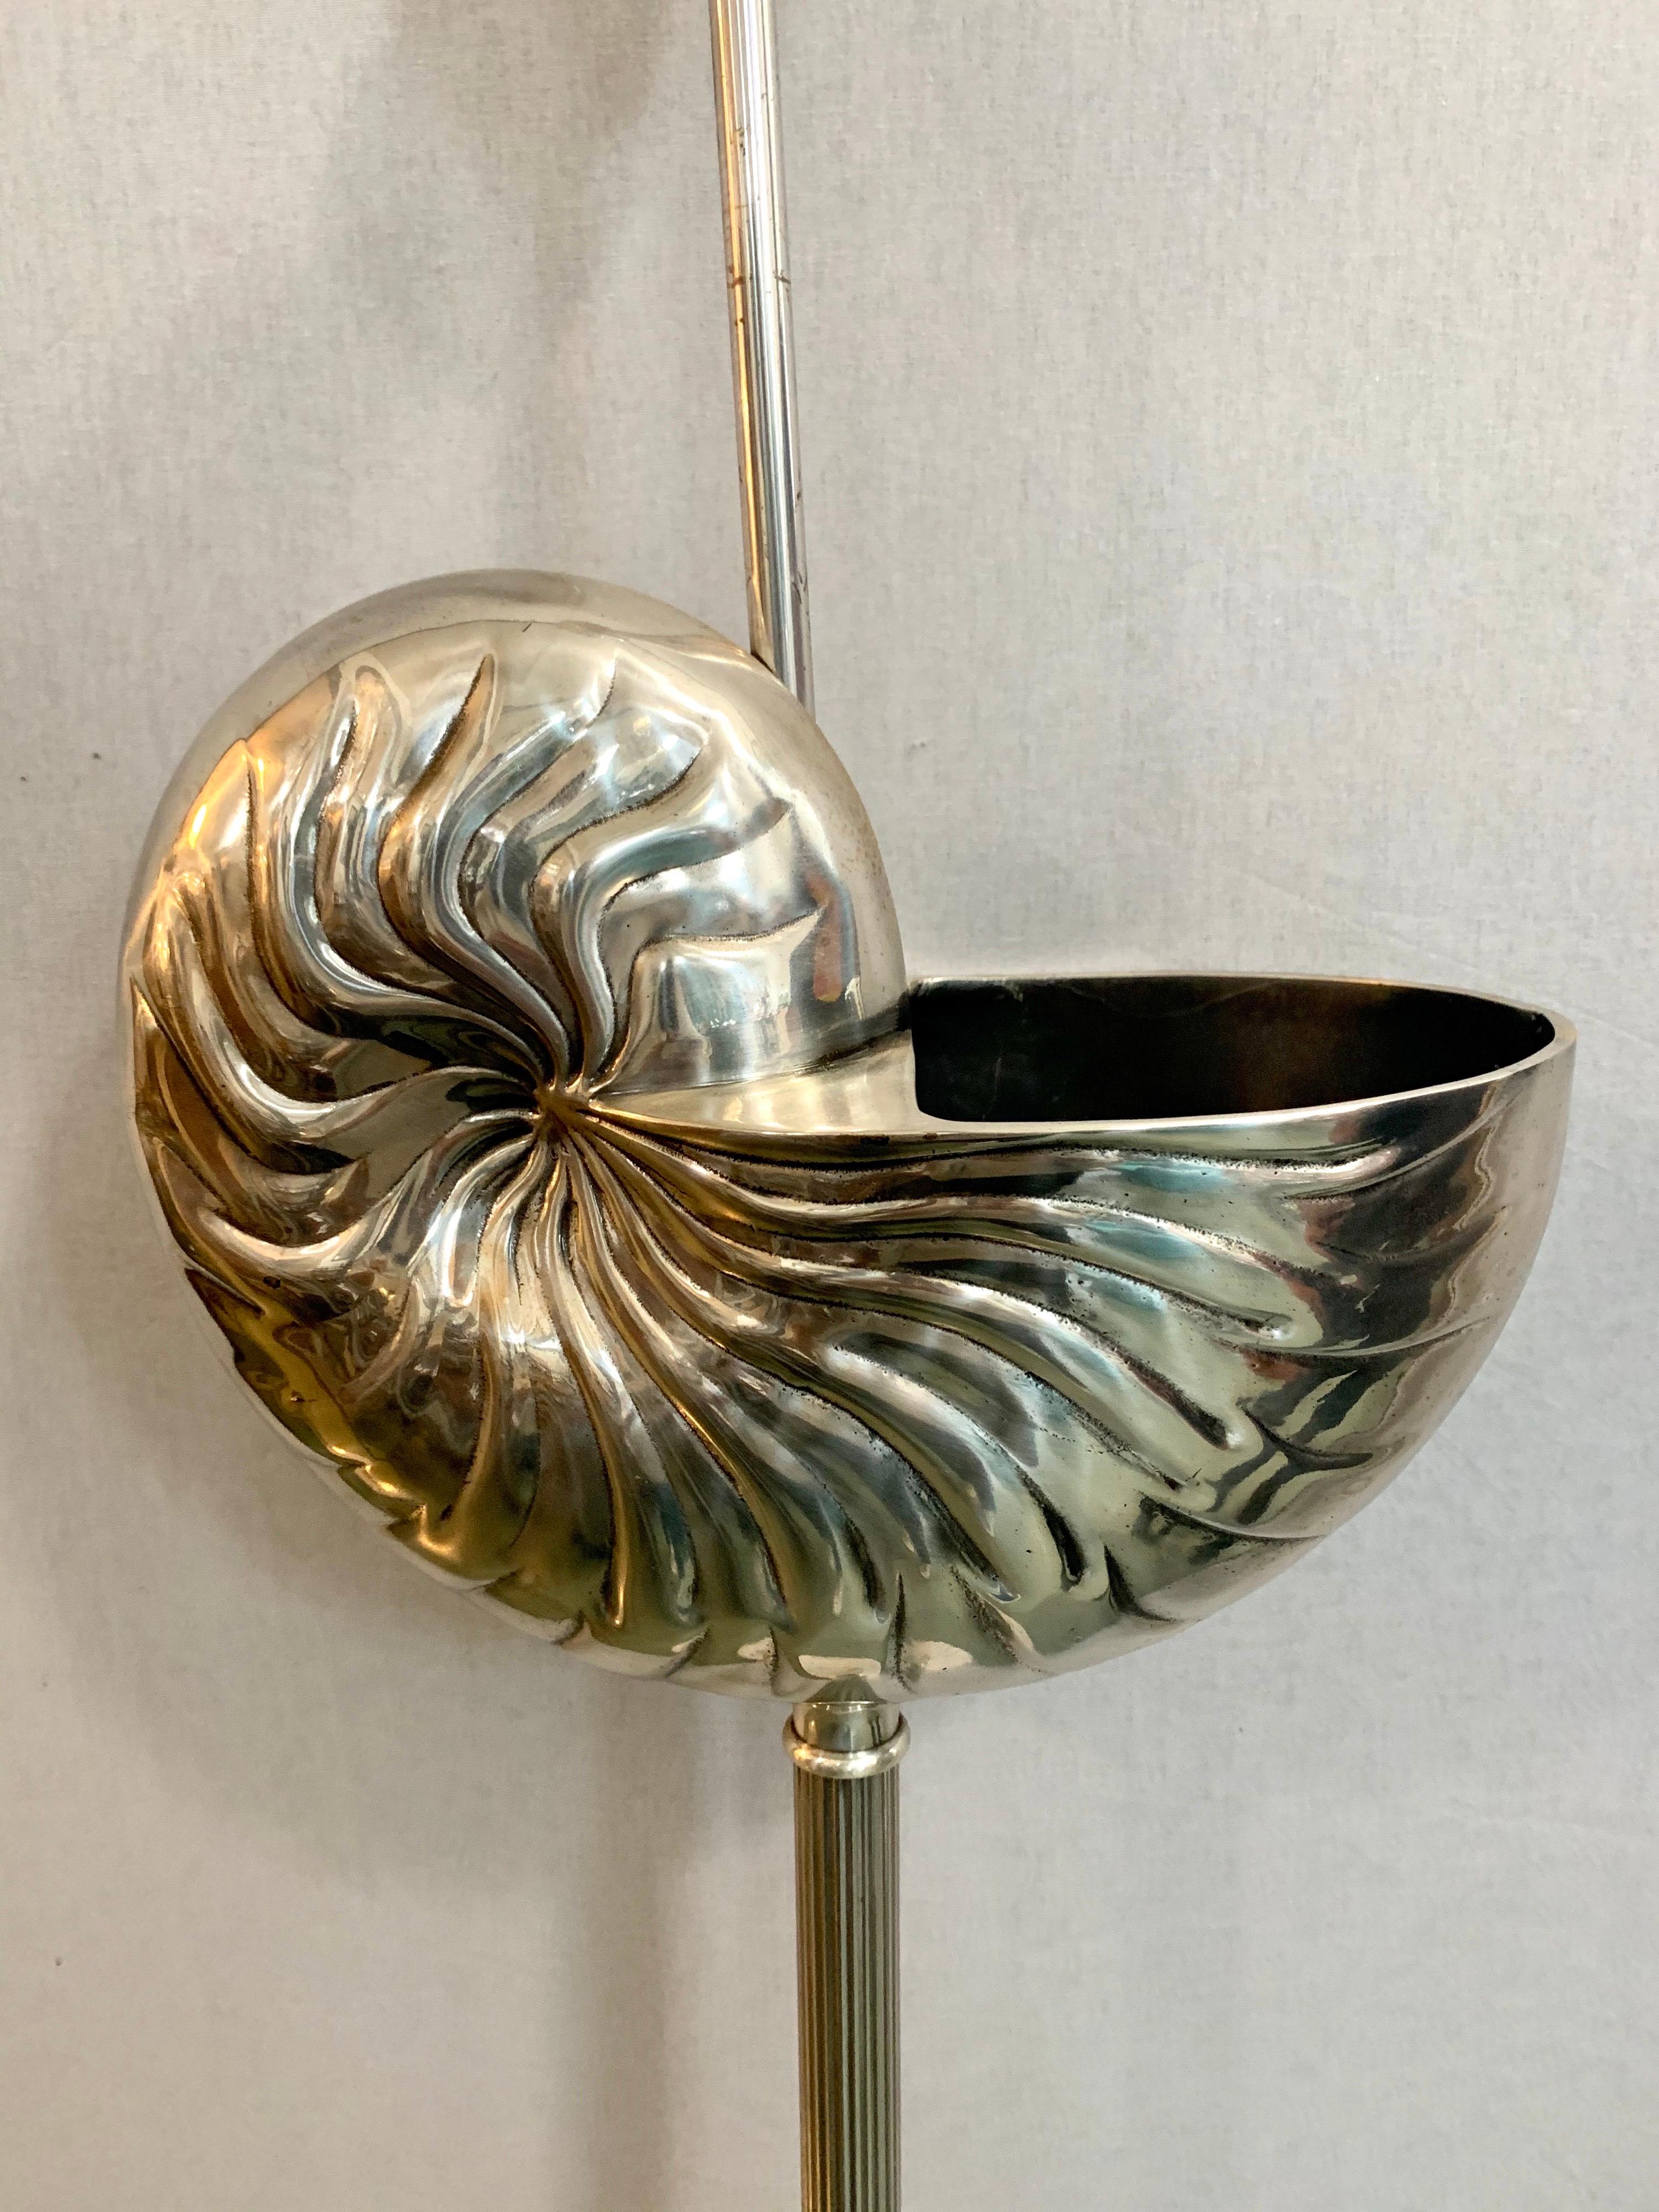 Unusual tall Mid-Century Modern snail shell silver floor lamp with one bulb.
Wired for USA and in perfect working order. Now, more than ever, home is where 
the heart is.